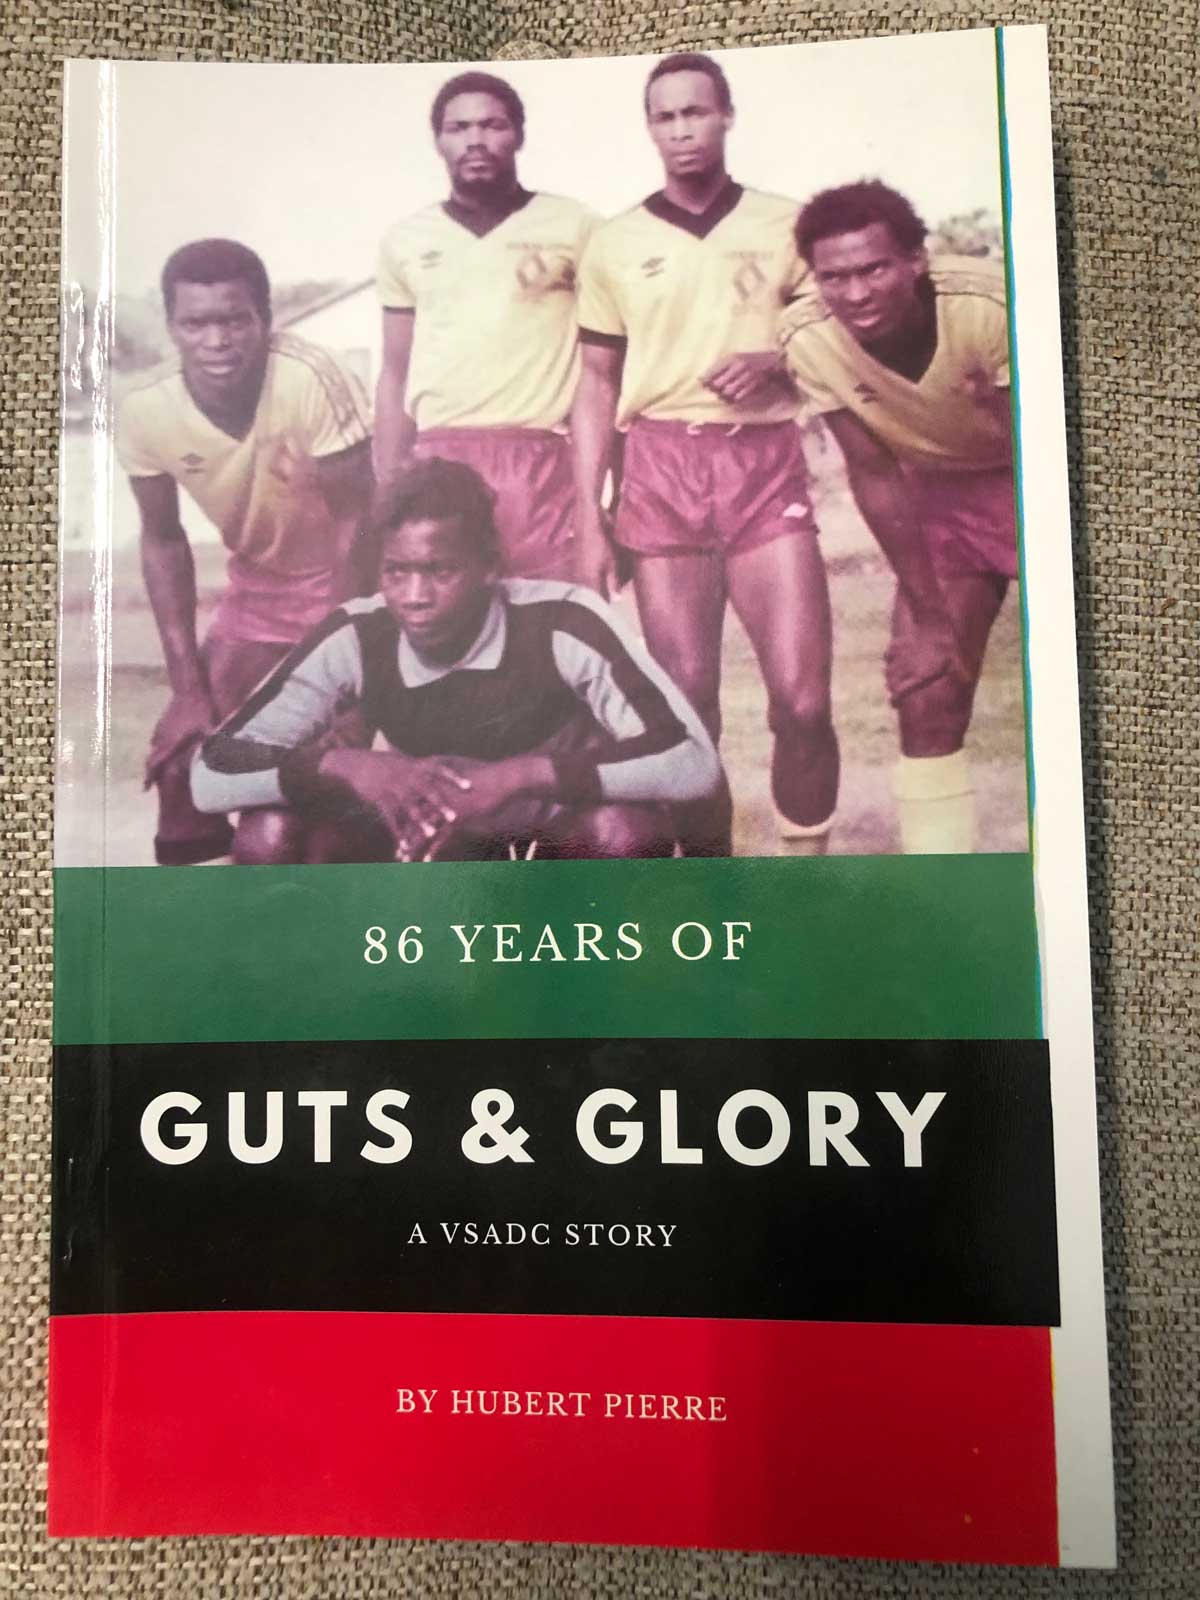 86 years of Guts and Glory: A VSADC Story